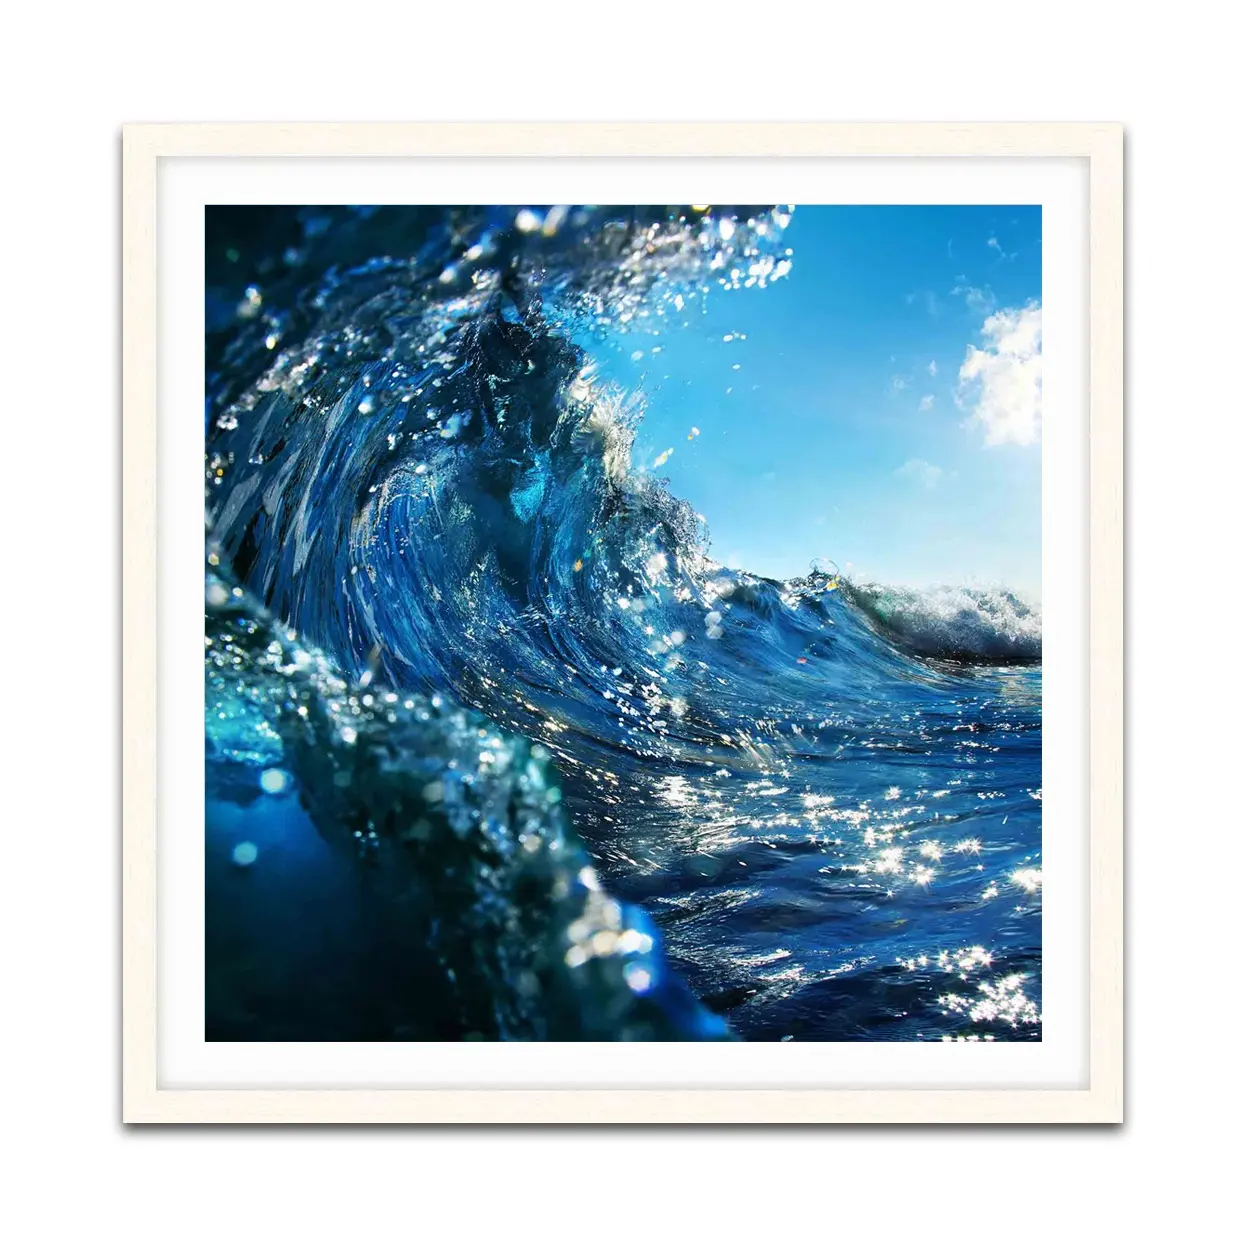 Blue Ocean Nature Photography Contemporary Picture Seascape Framed Canvas Print Wall Art for Hotel Room